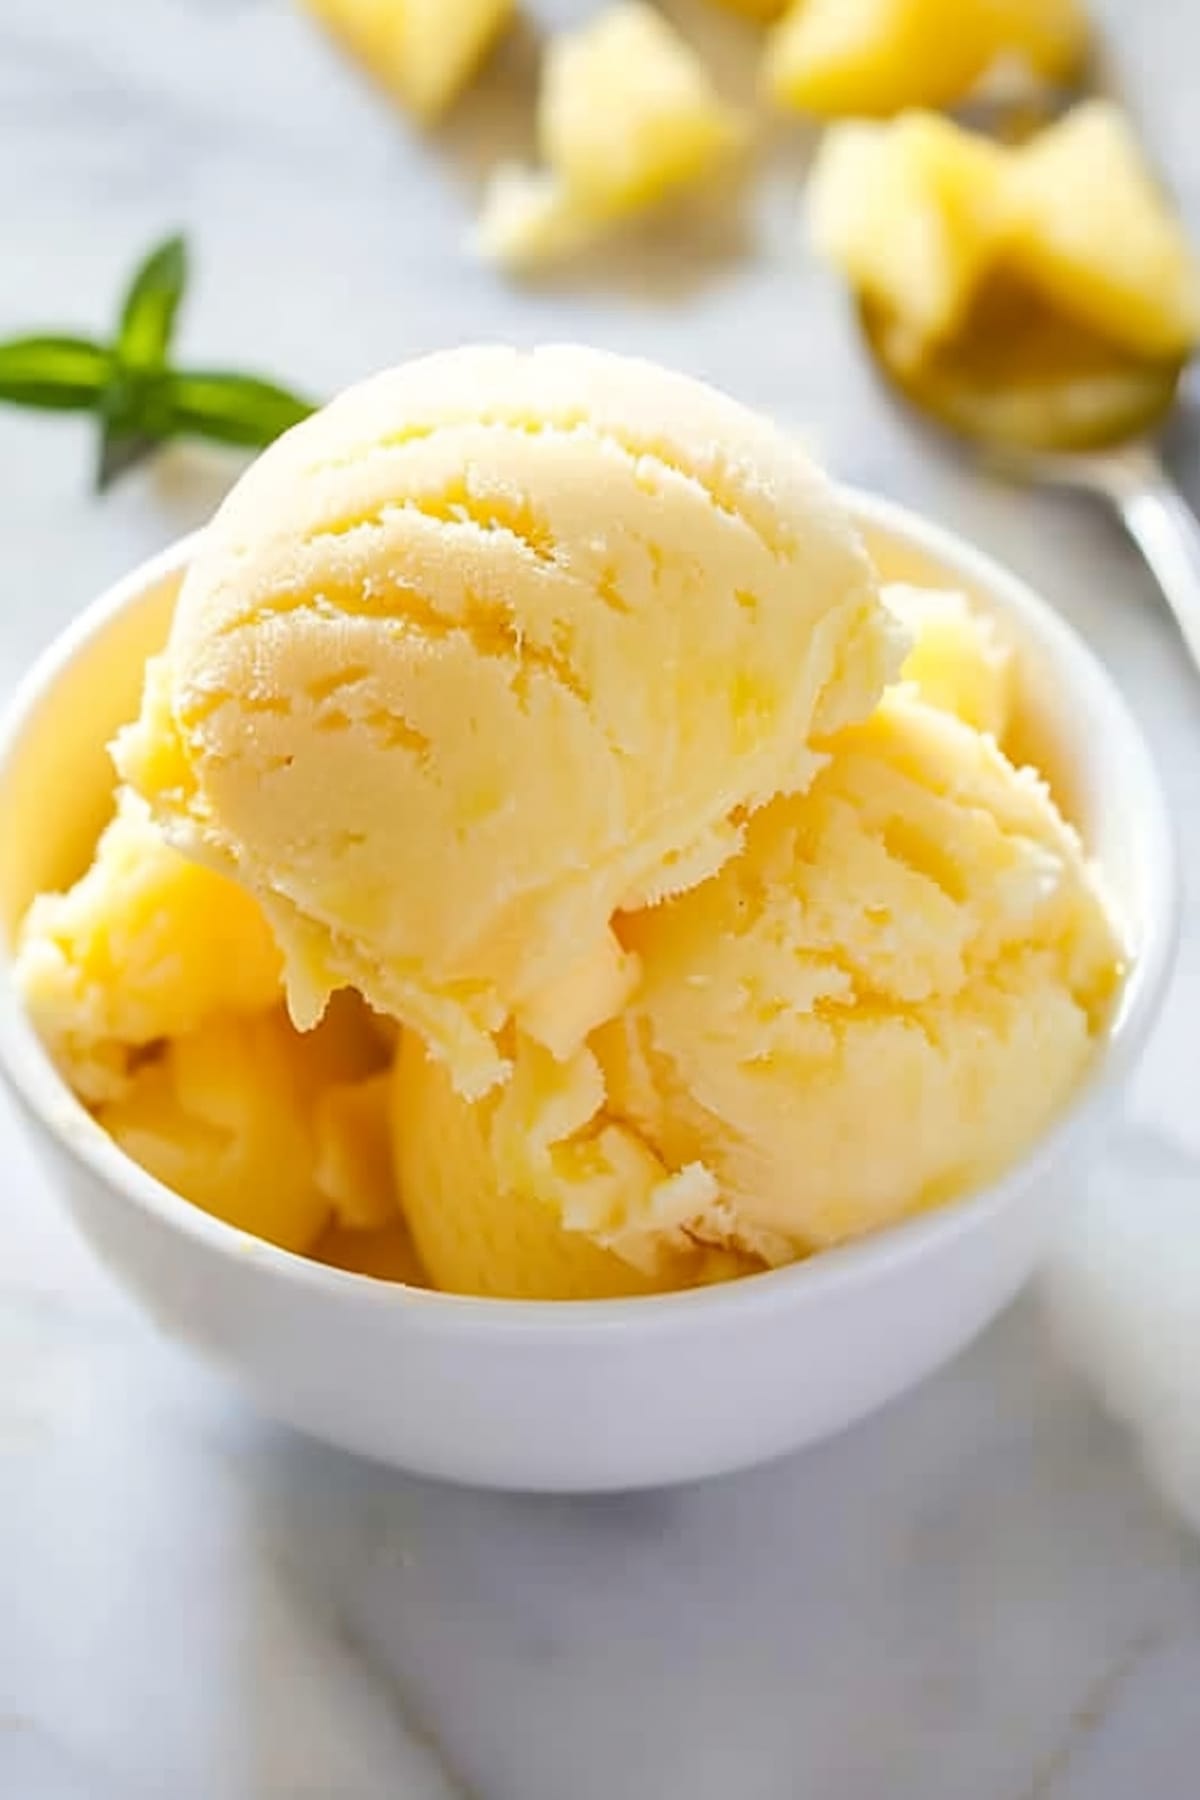 Pineapple sorbet ice cream in a bowl: a refreshing treat with a creamy texture and a tropical flavor